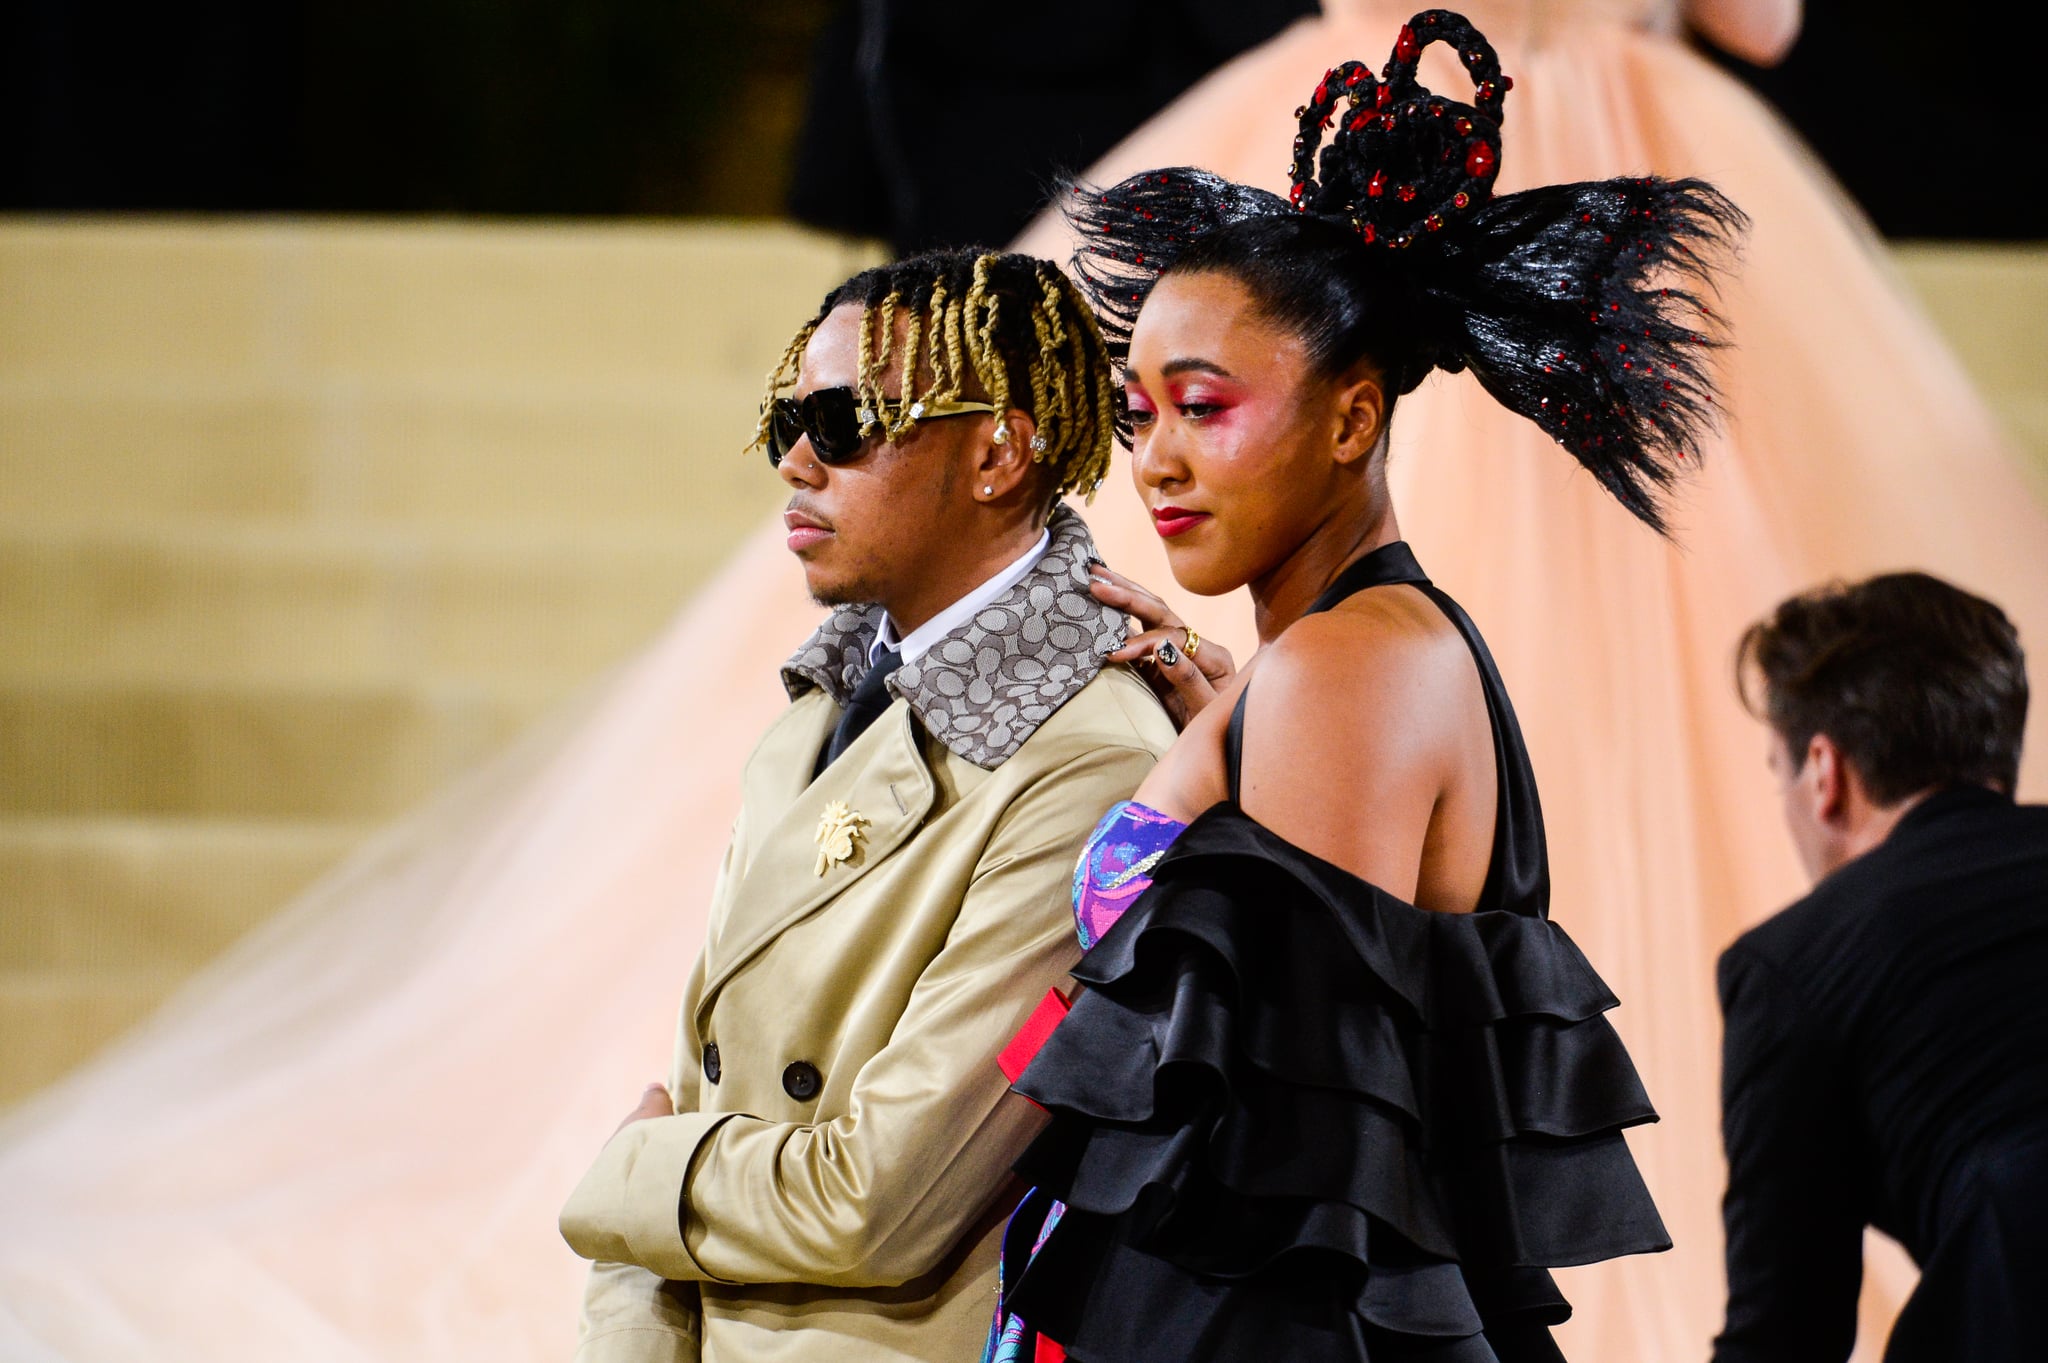 NEW YORK, NEW YORK - SEPTEMBER 13: Rapper Cordae (L) and professional tennis player Naomi Osaka attend the 2021 Met Gala Celebrating In America: A Lexicon Of Fashion at the Metropolitan Museum Of Art on September 13, 2021 in New York City. (Photo by Ray Tamarra/GC Images)